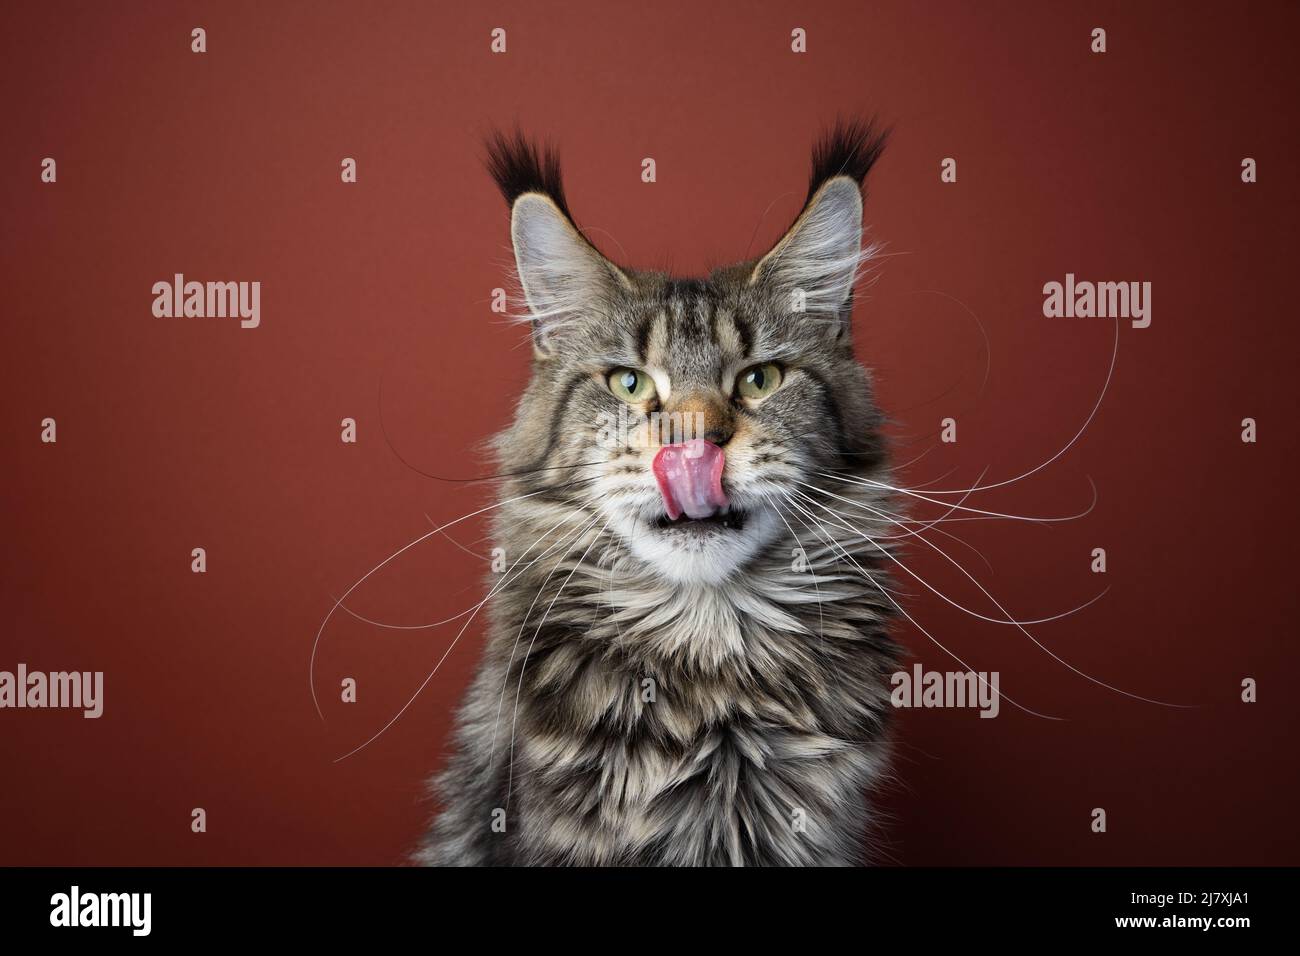 tabby maine coon cat with long whiskers looking at camera licking lips portrait on red brown background Stock Photo